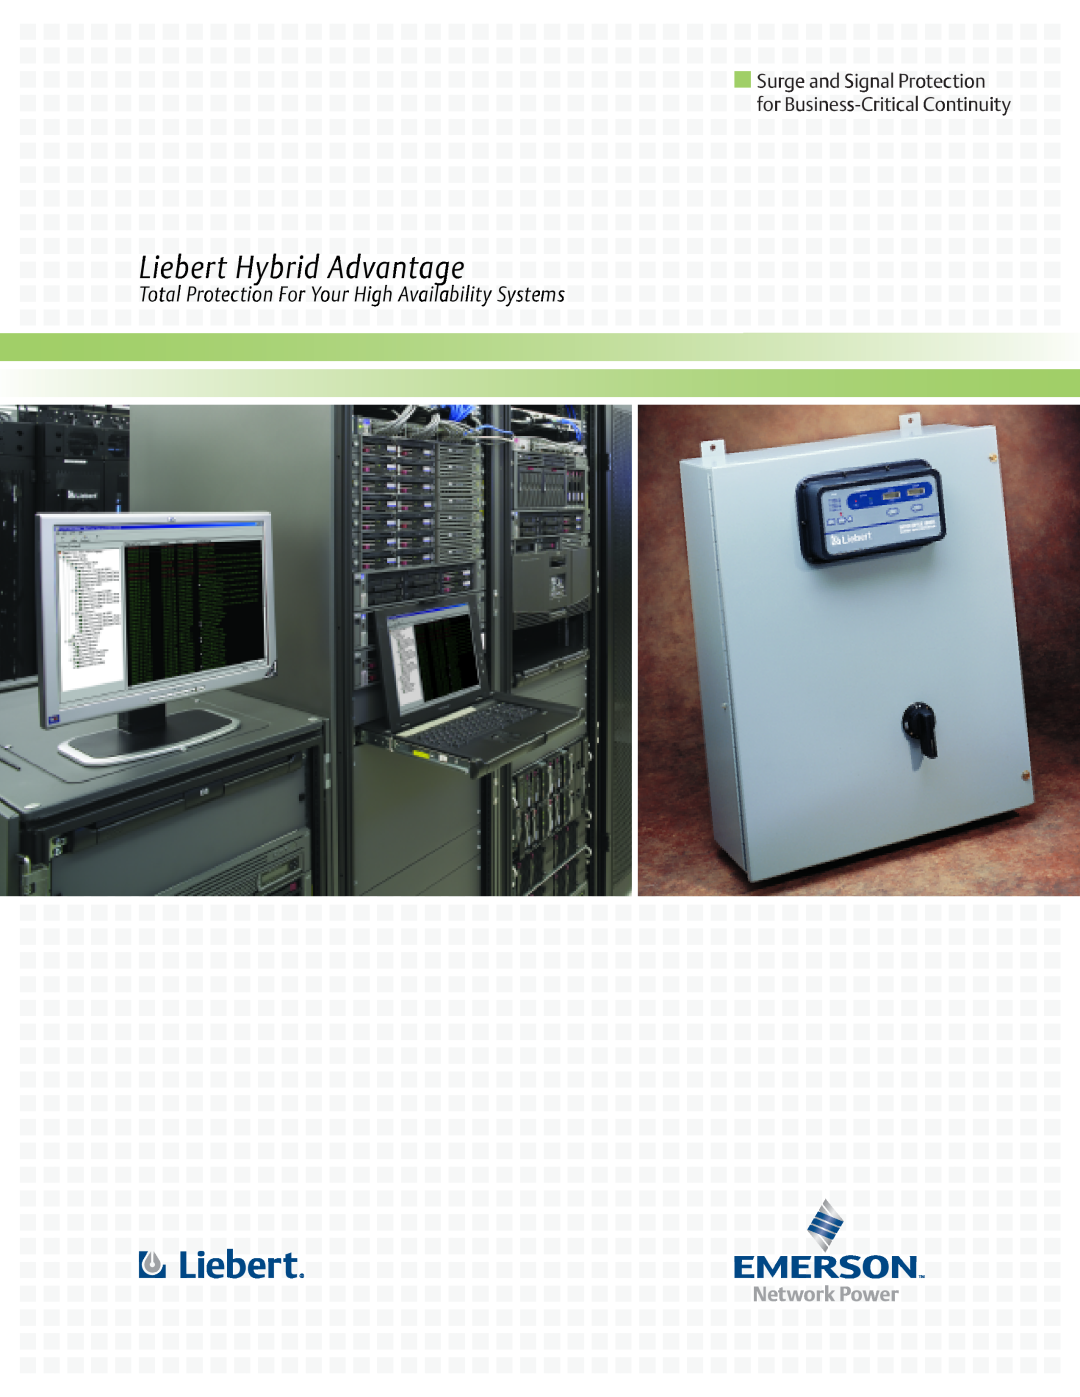 Emerson Surge and Signal Protection manual Liebert Hybrid Advantage, Total Protection For Your High Availability Systems 